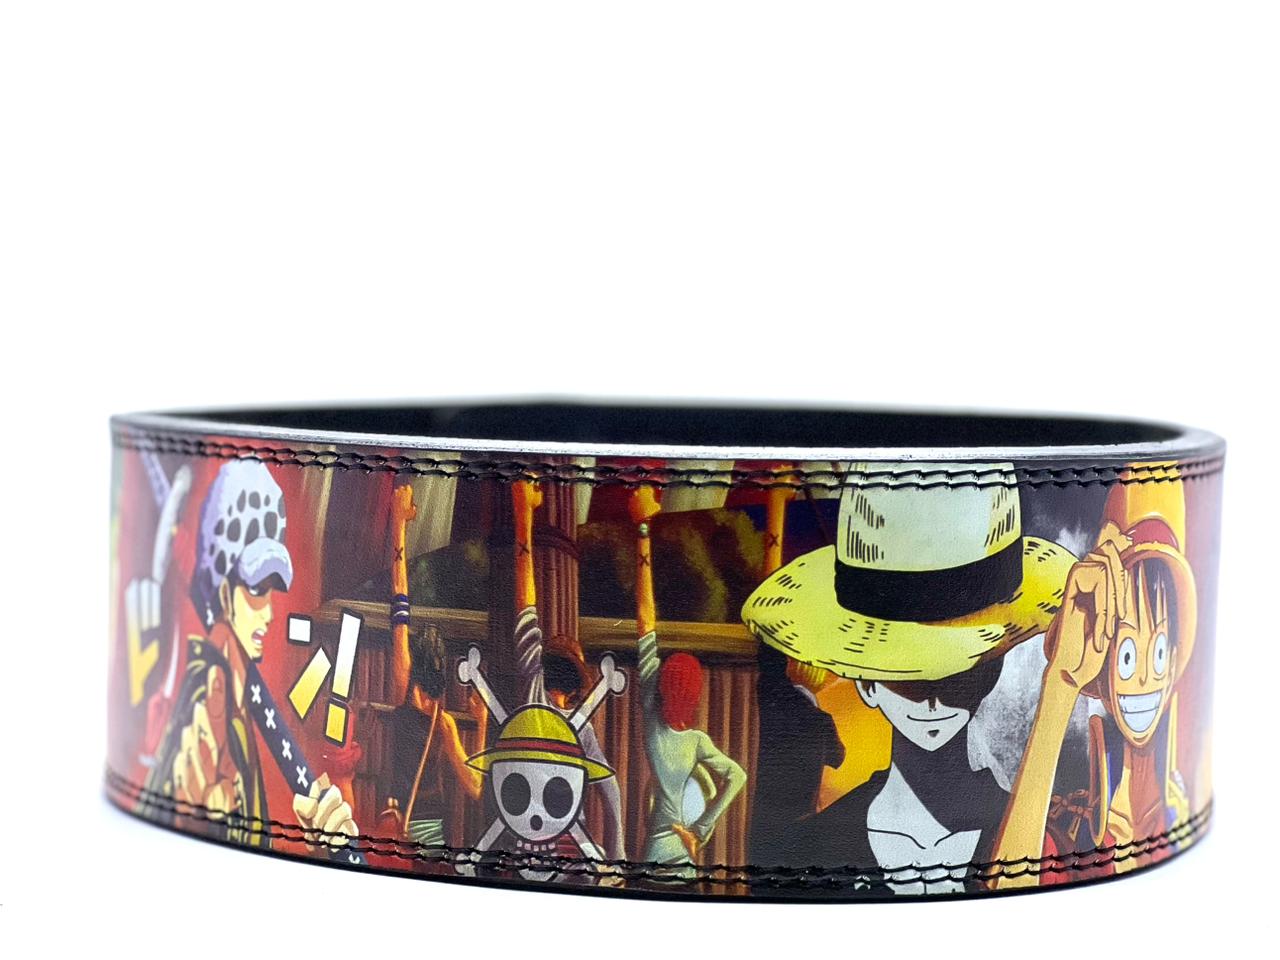 Limited Edition Anime Weightlifting Belt - Hand Made in UK